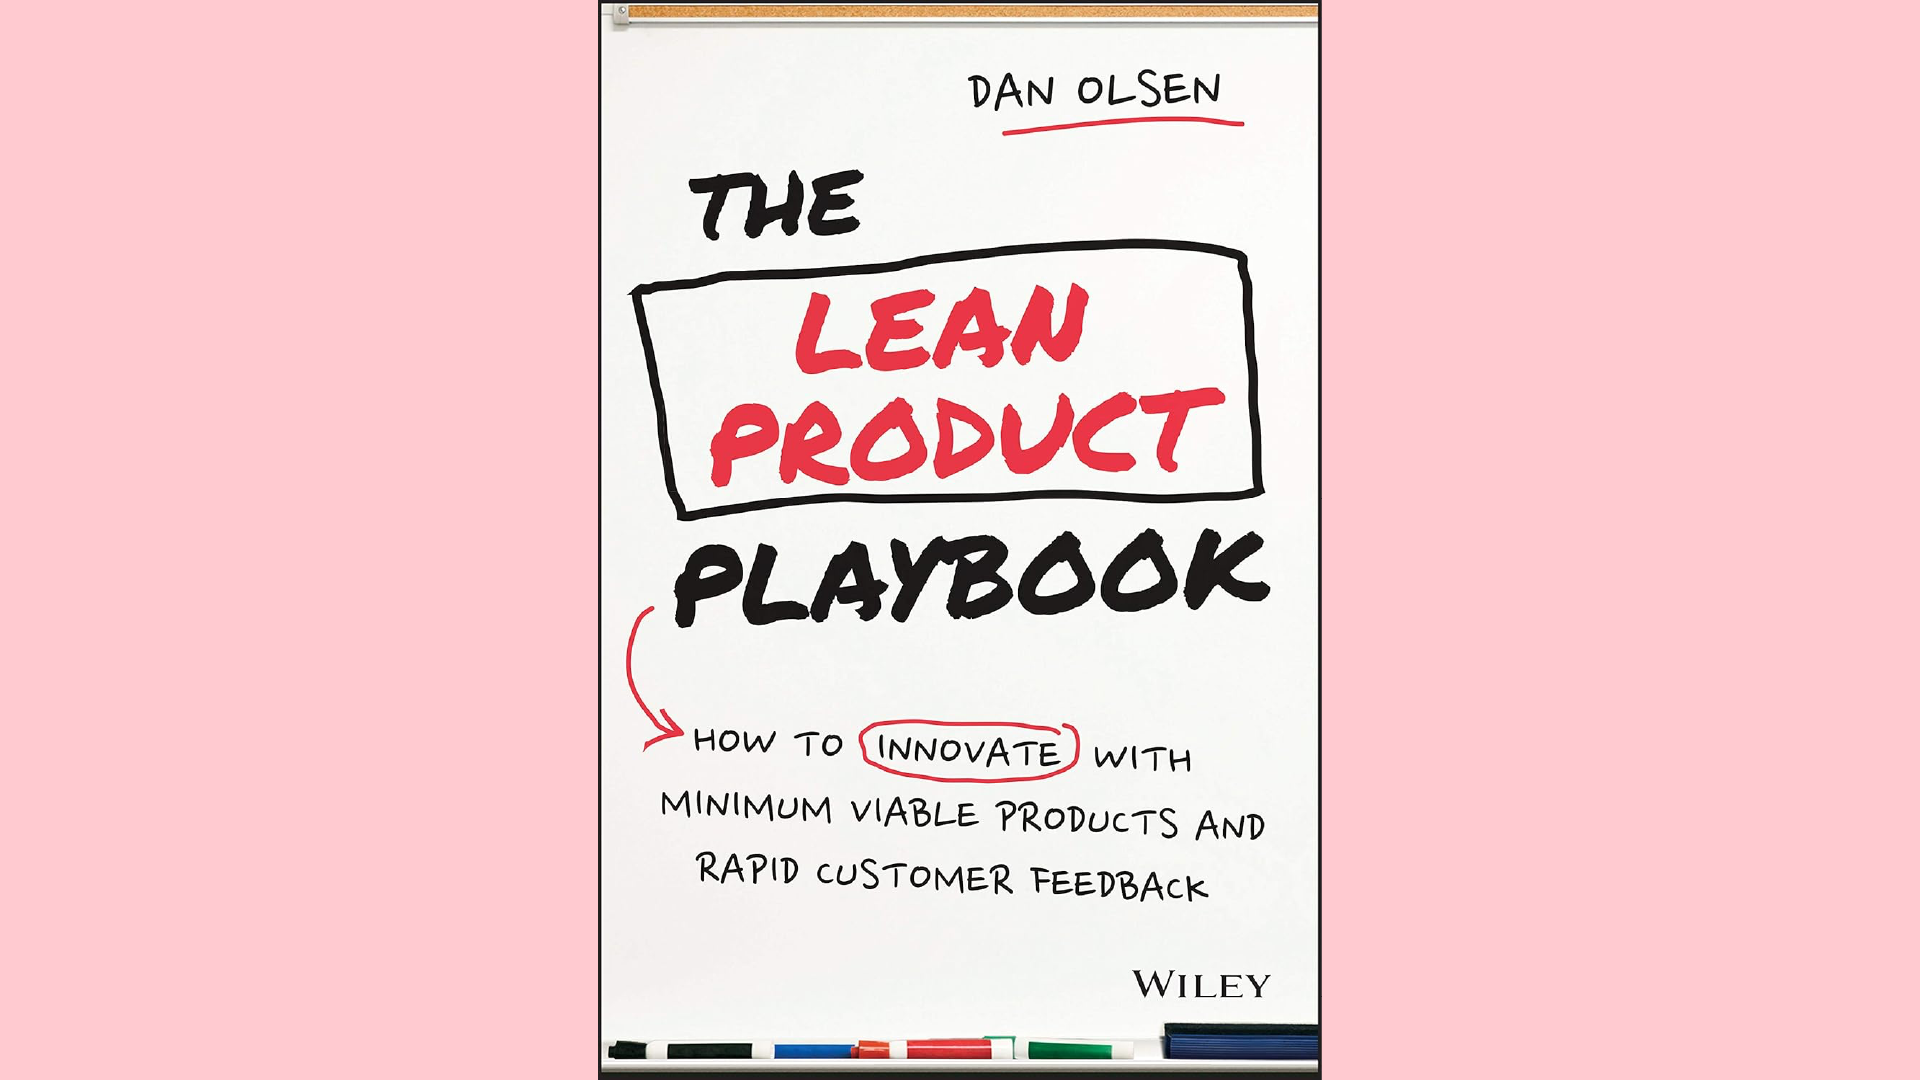 Summary: The Lean Product Playbook by Dan Olsen